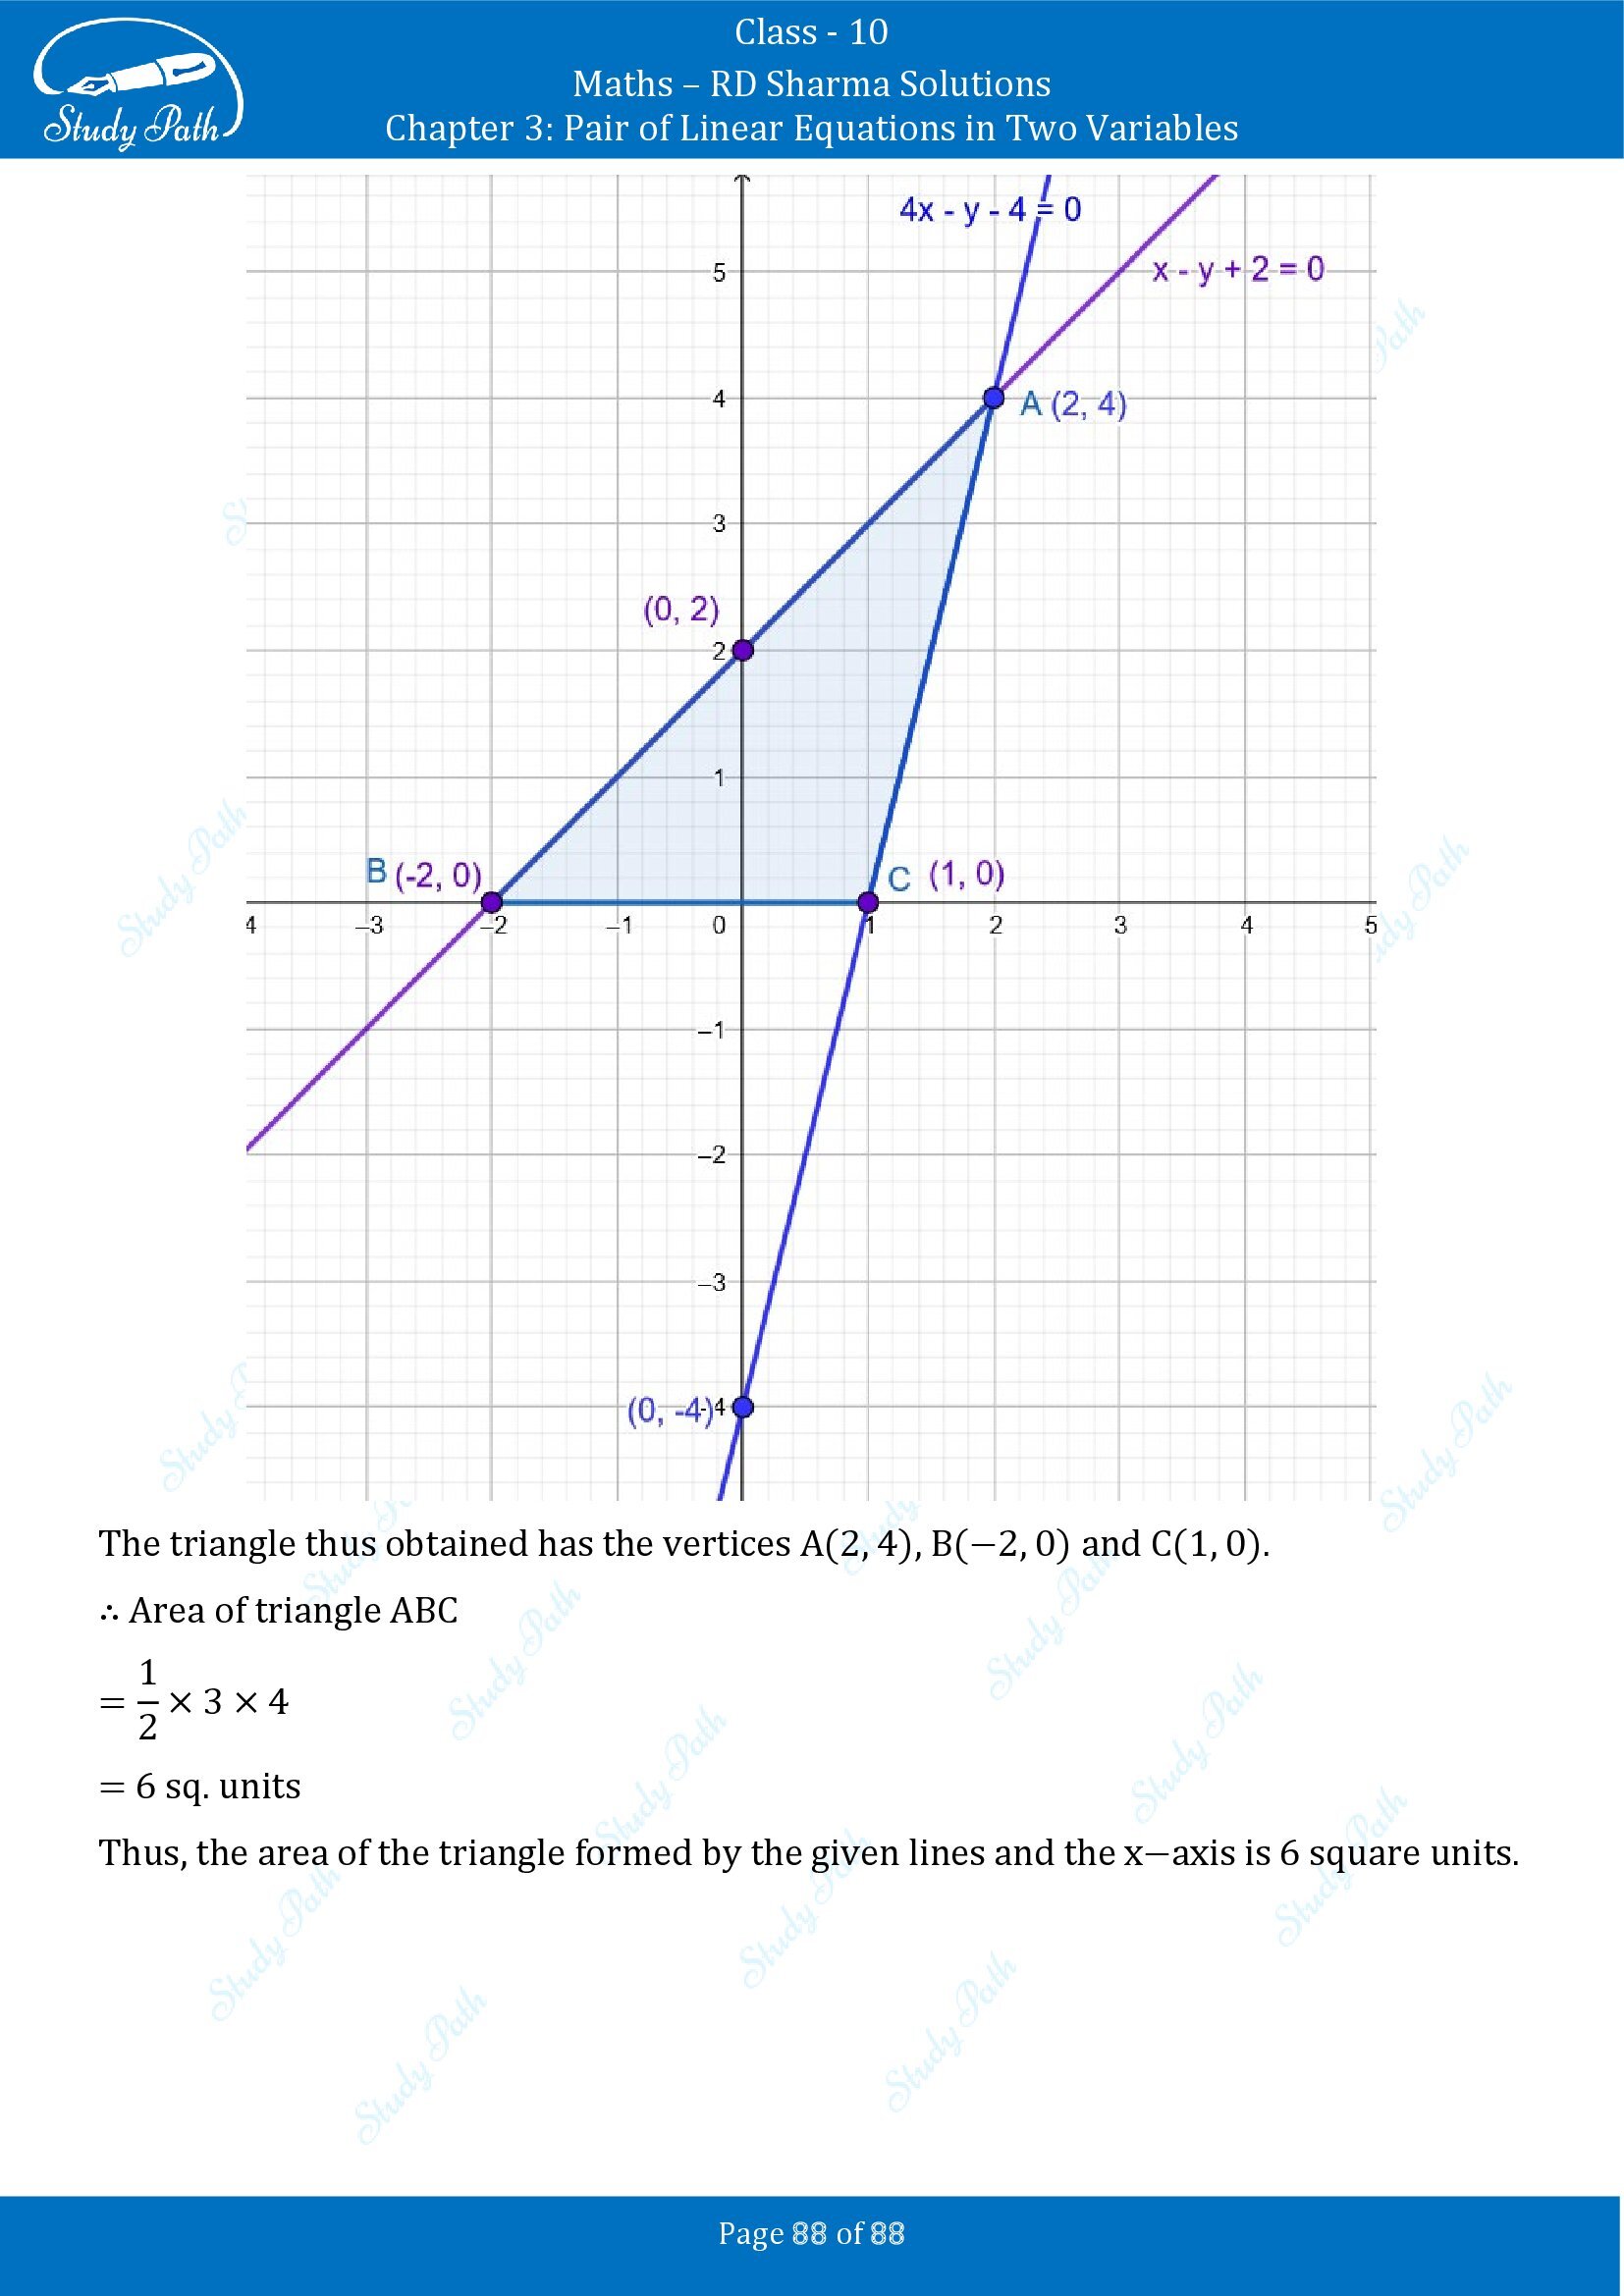 RD Sharma Solutions Class 10 Chapter 3 Pair of Linear Equations in Two Variables Exercise 3.2 00088